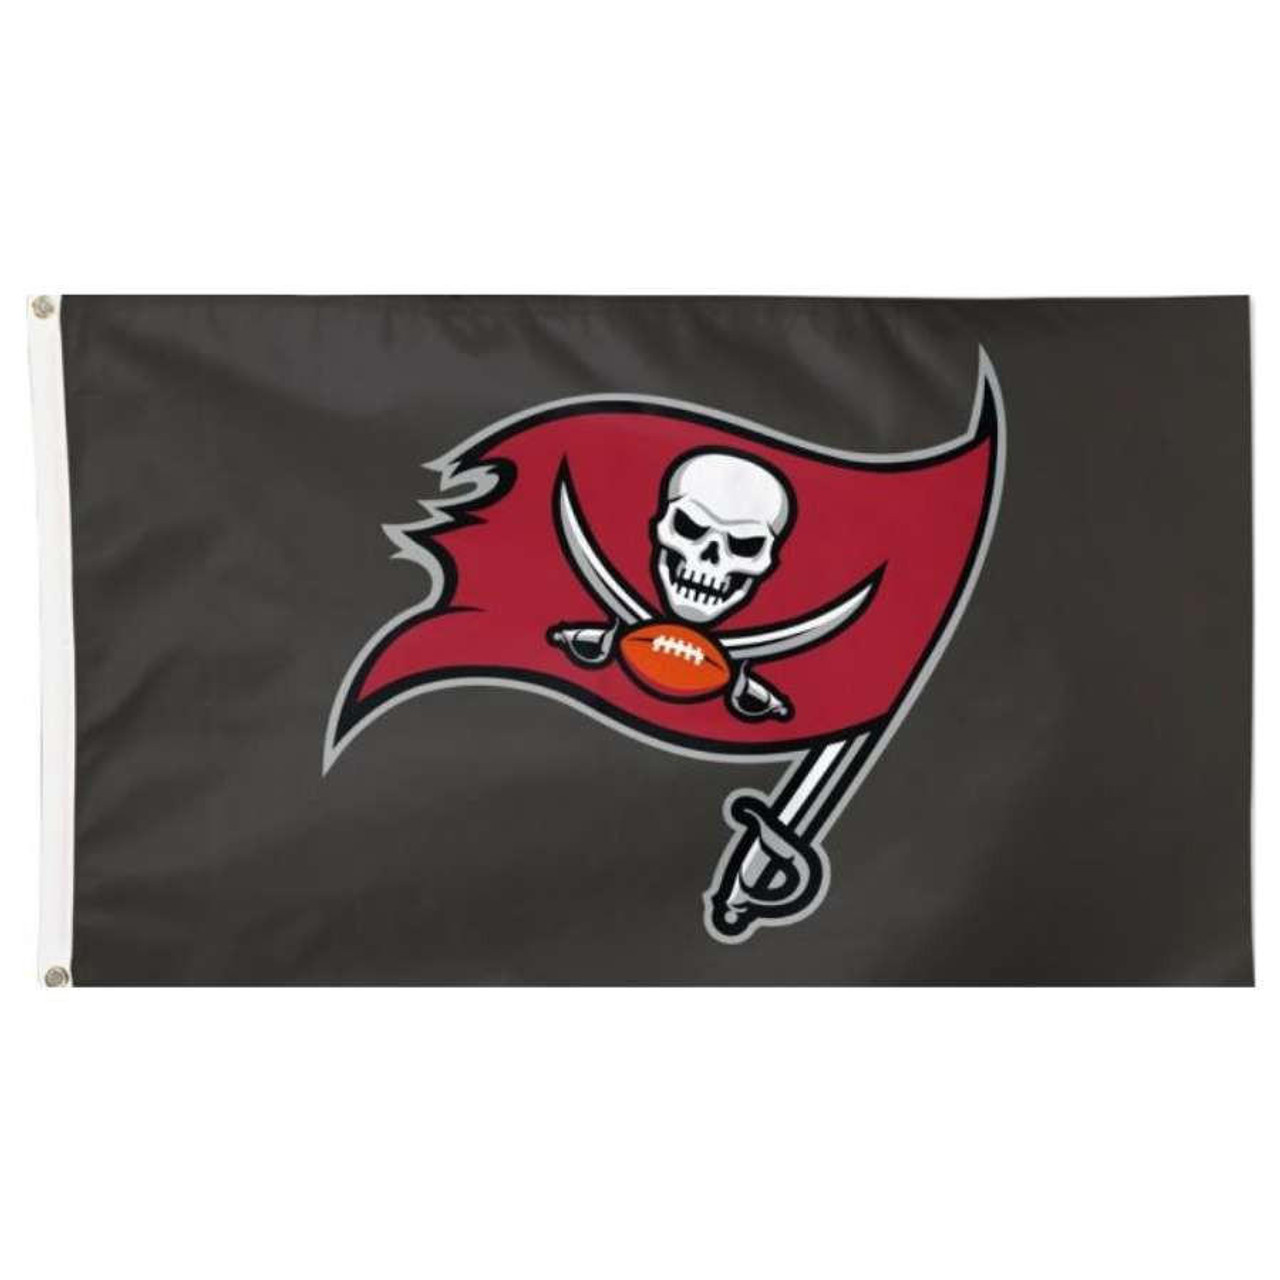 Tampa Bay Buccaneers Flag - Officially Licensed NFL Flag